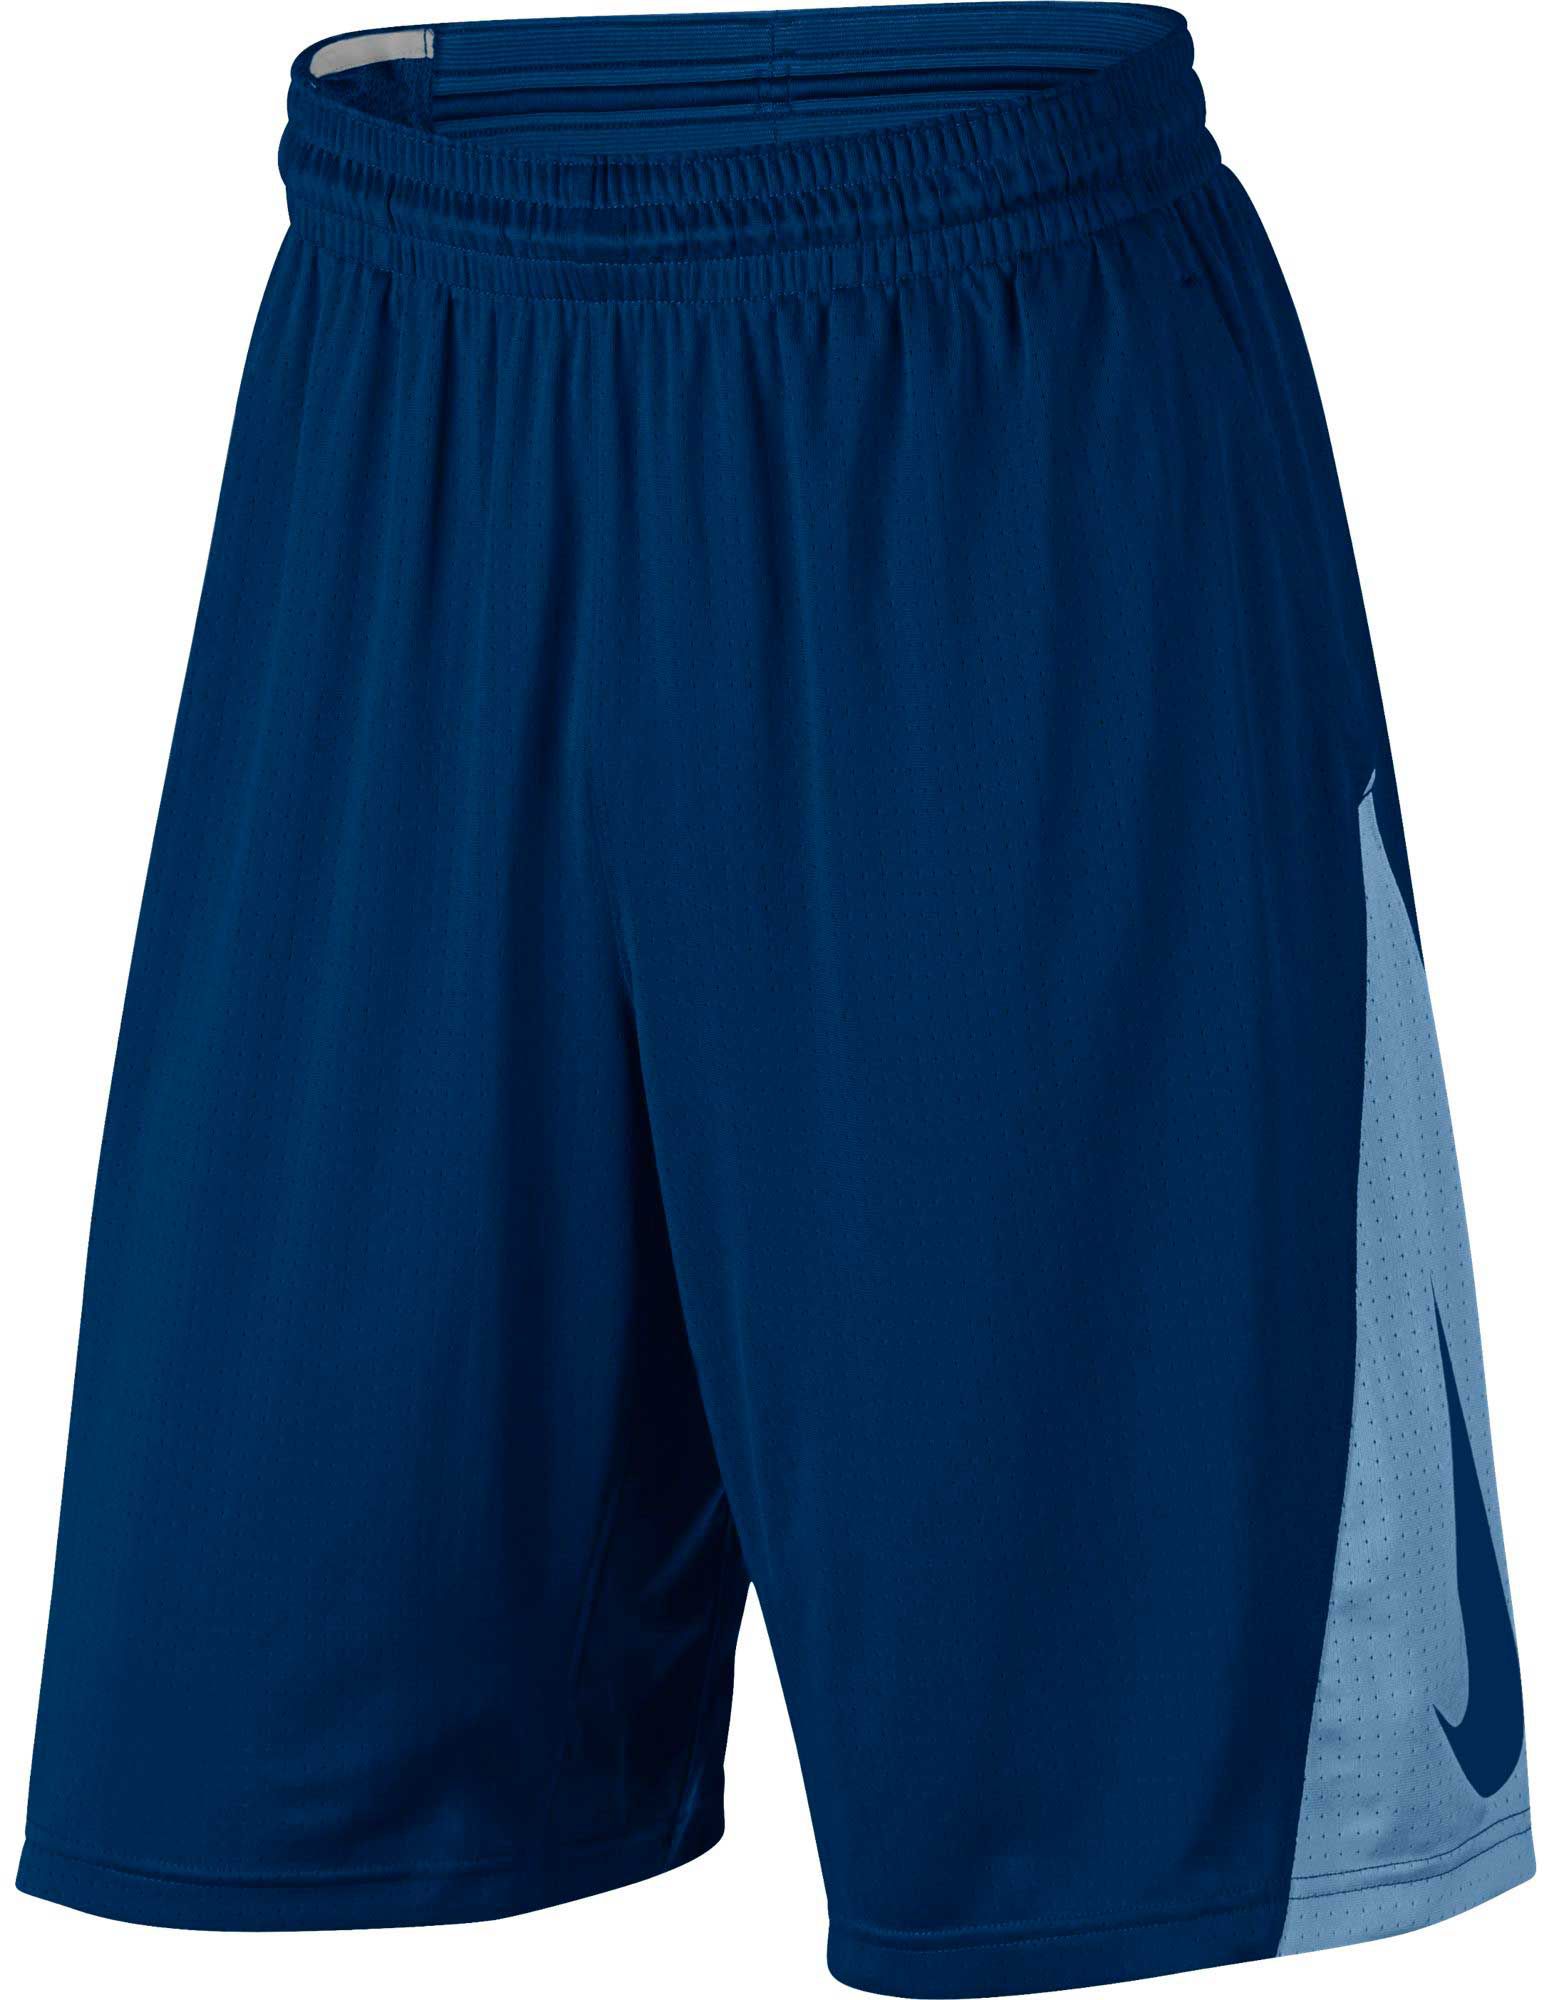 Men's Workout Shorts | DICK'S Sporting Goods